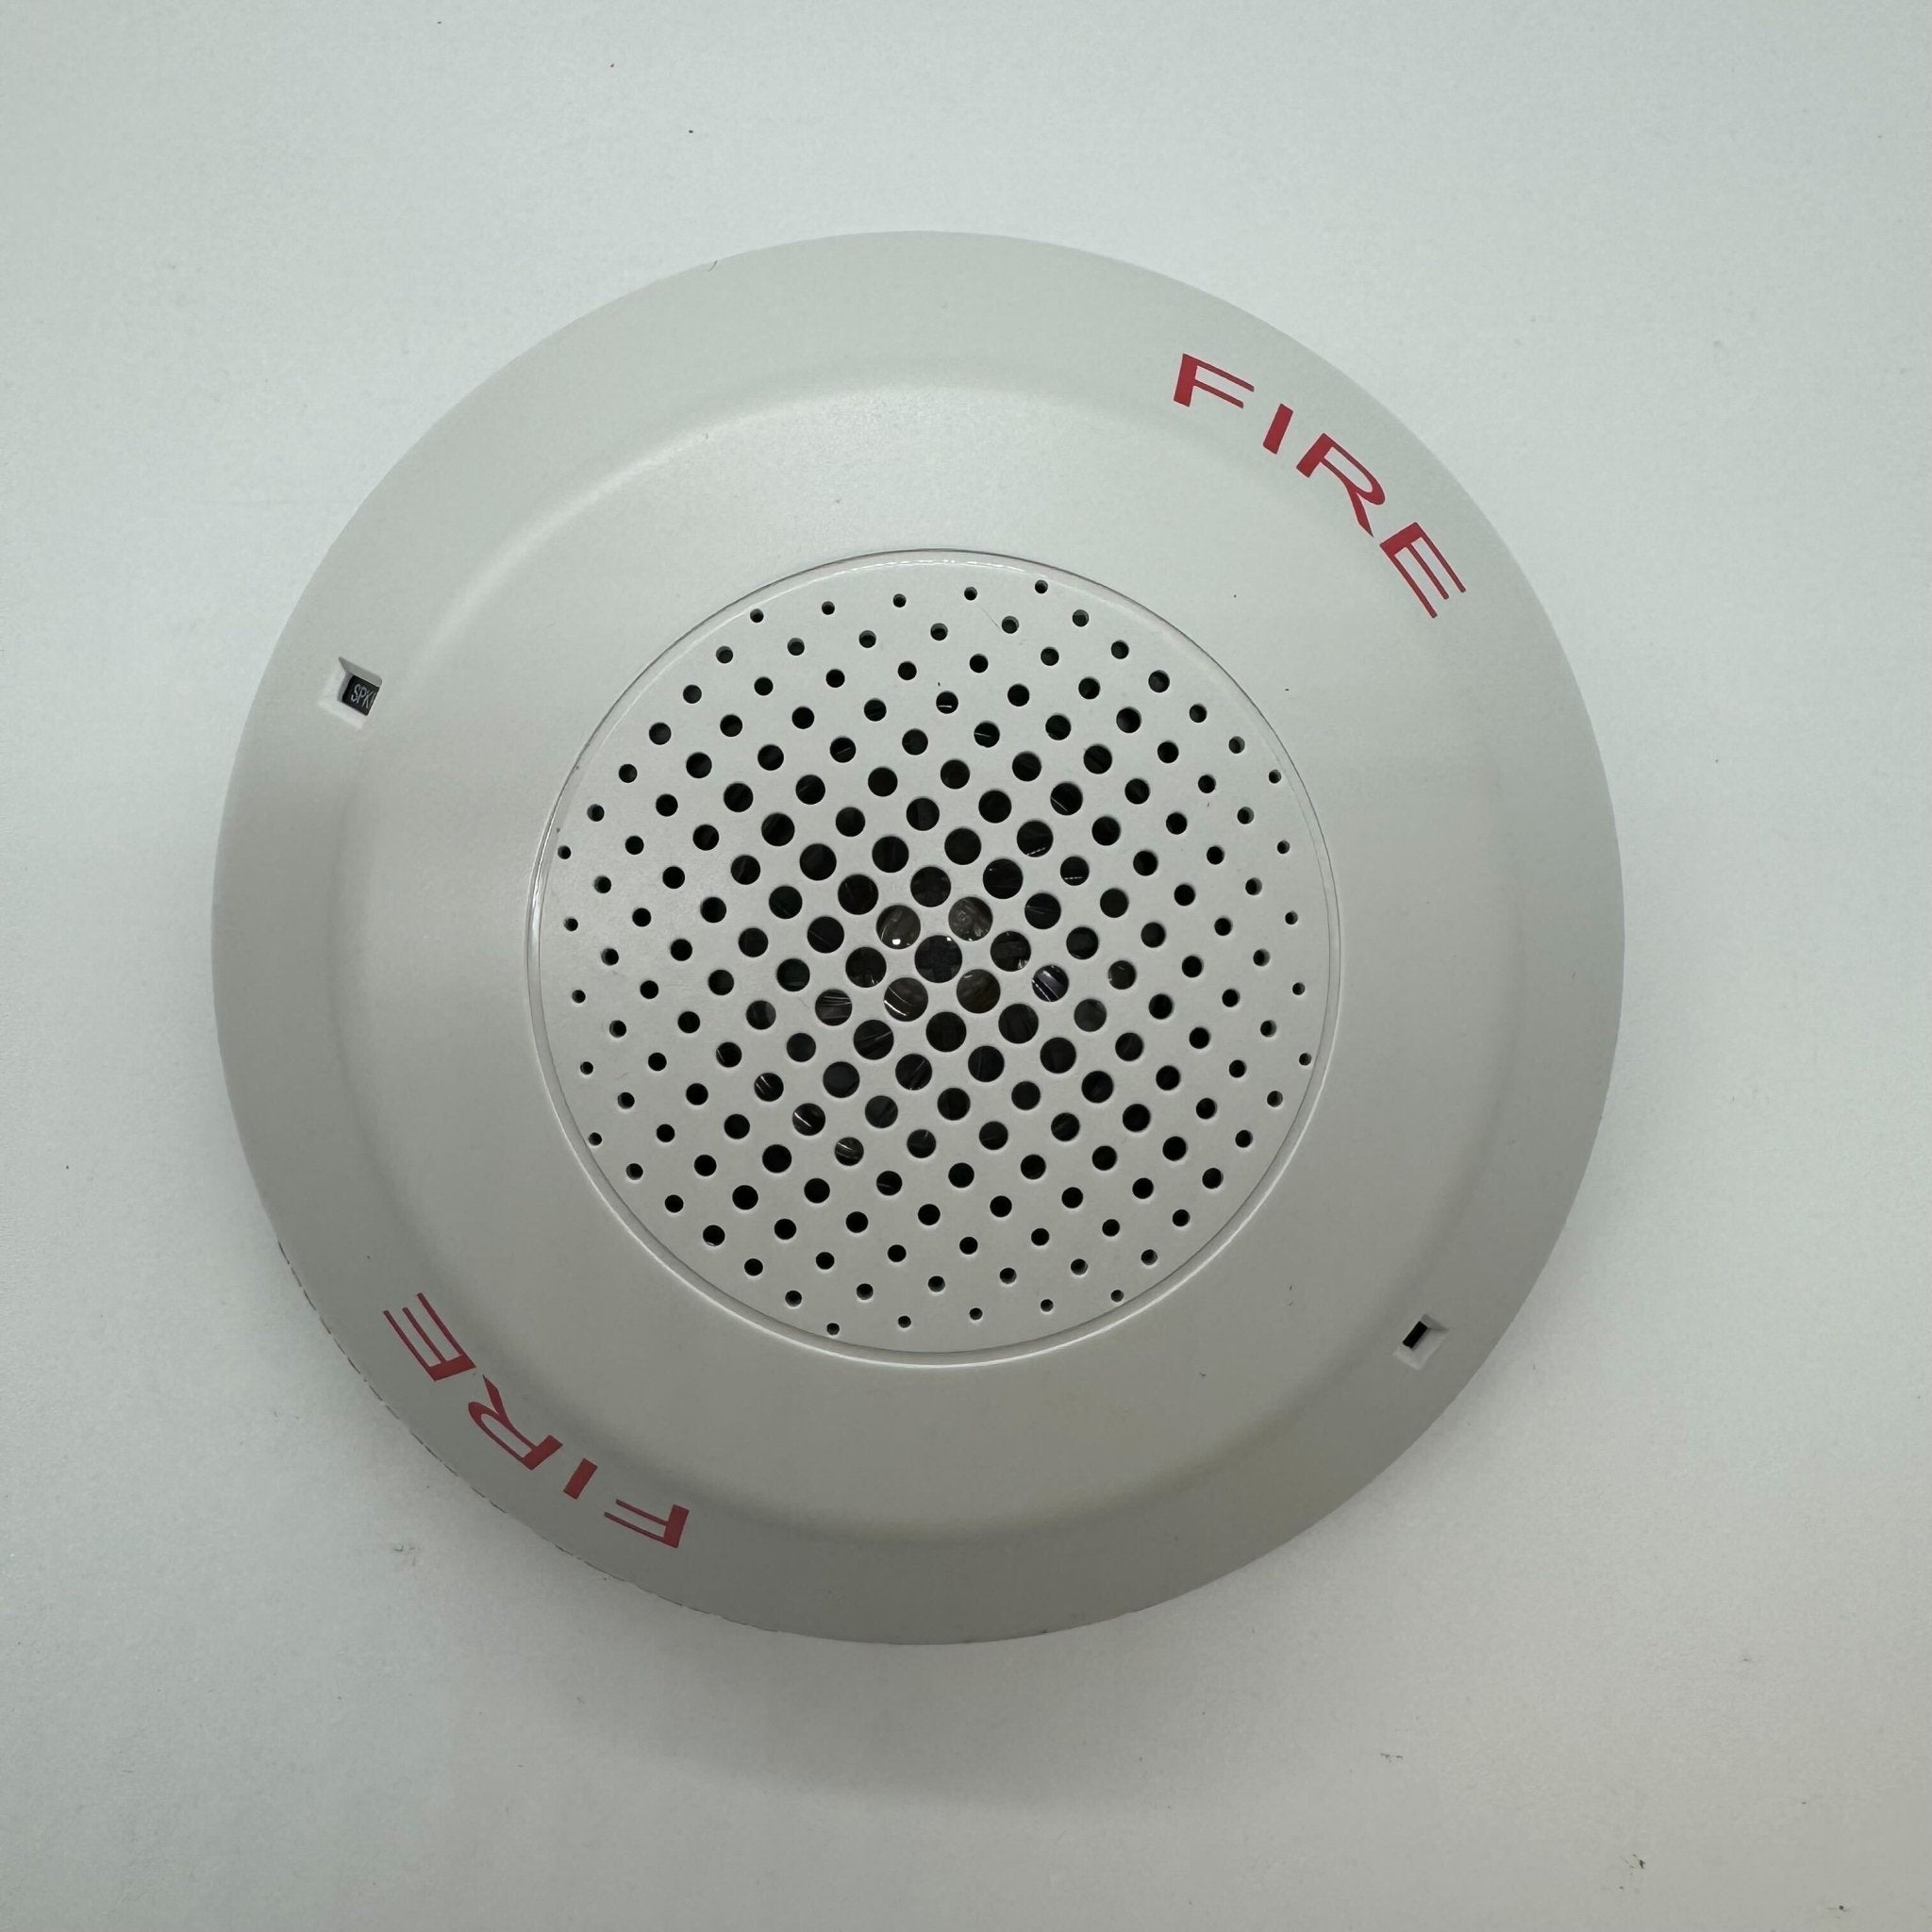 Edwards GCSWF - The Fire Alarm Supplier